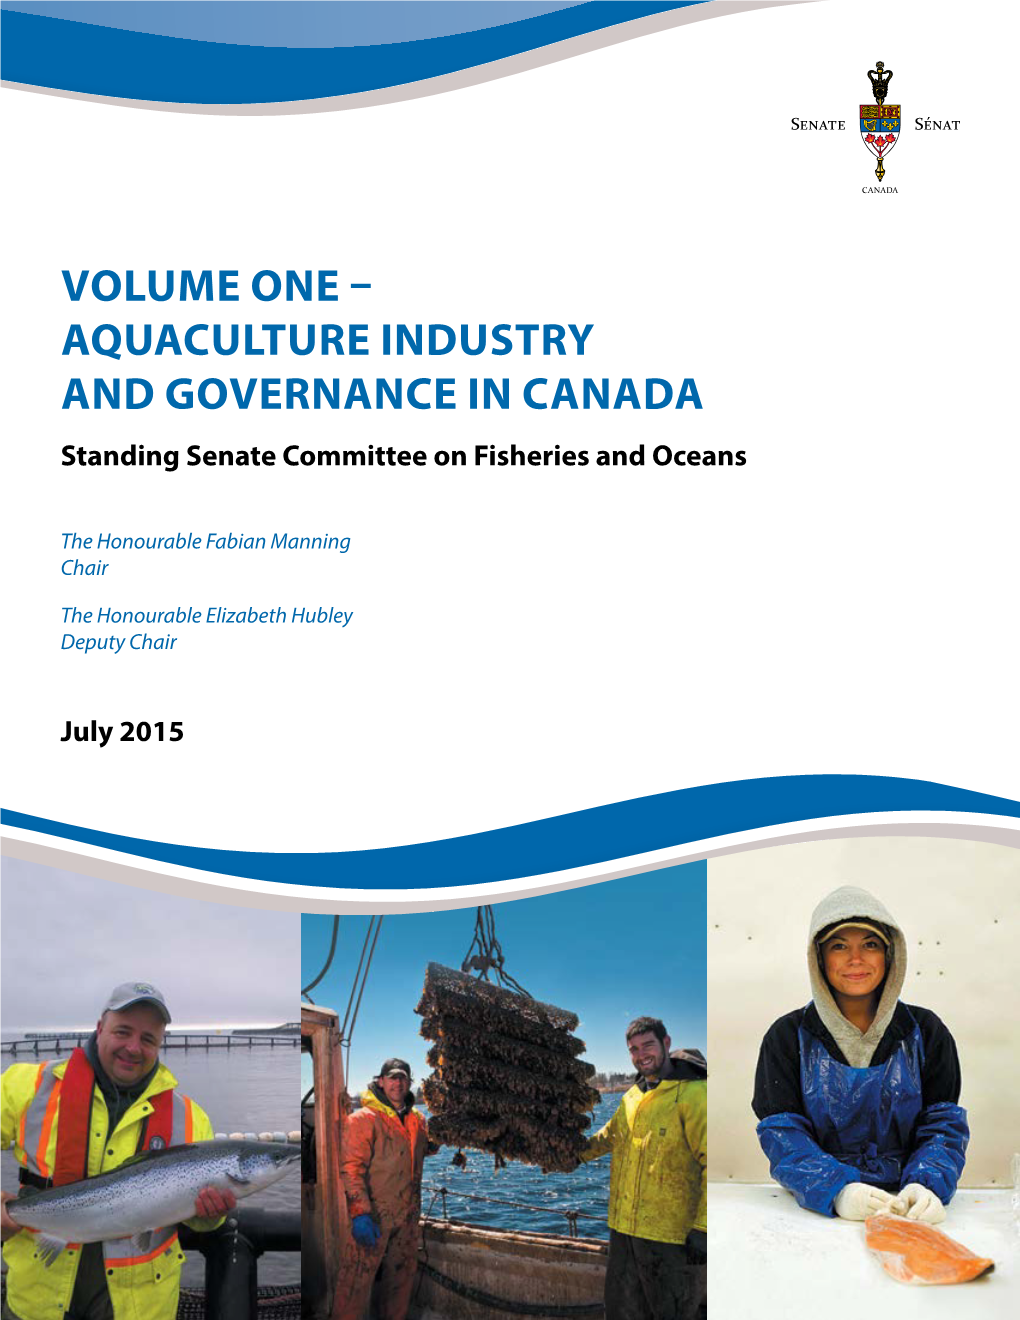 AQUACULTURE INDUSTRY and GOVERNANCE in CANADA Standing Senate Committee on Fisheries and Oceans